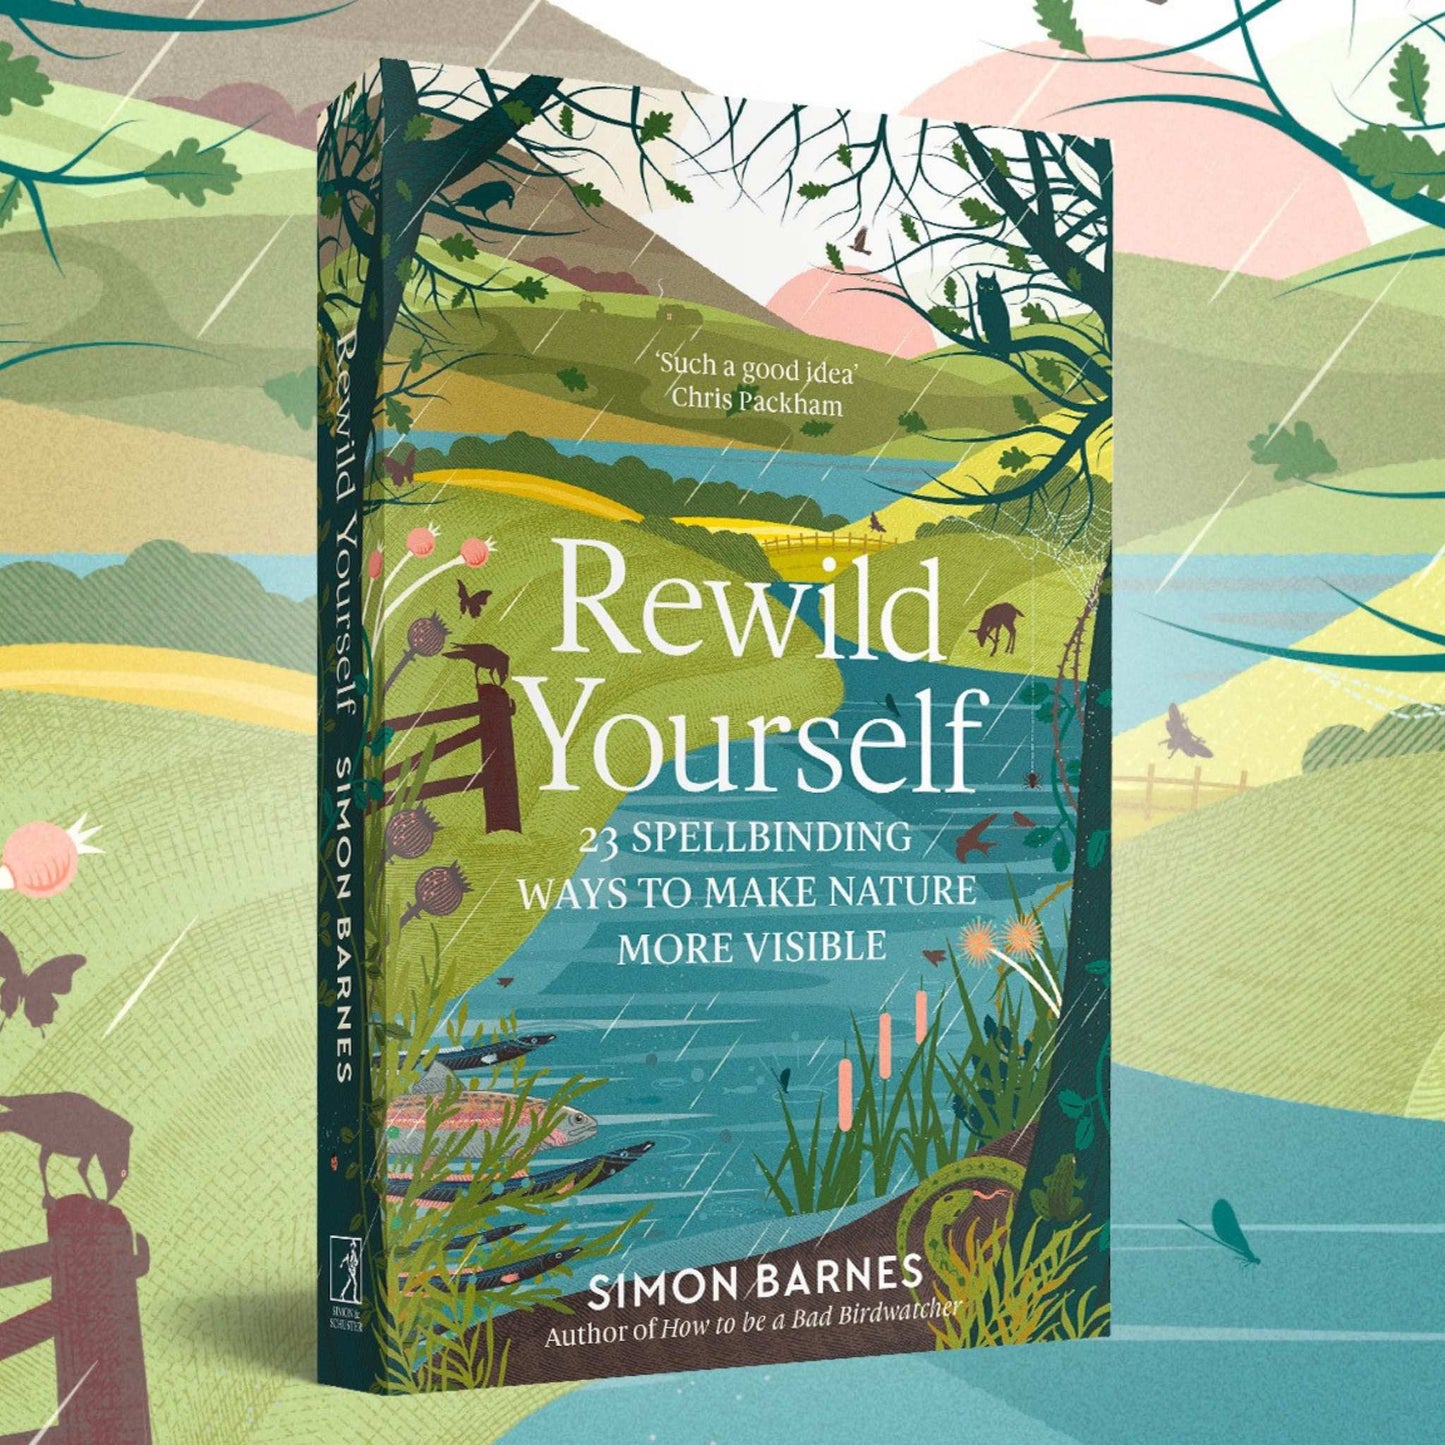 Our Bookshelf Print Books Rewild Yourself : 23 Spellbinding Ways to Make Nature More Visible